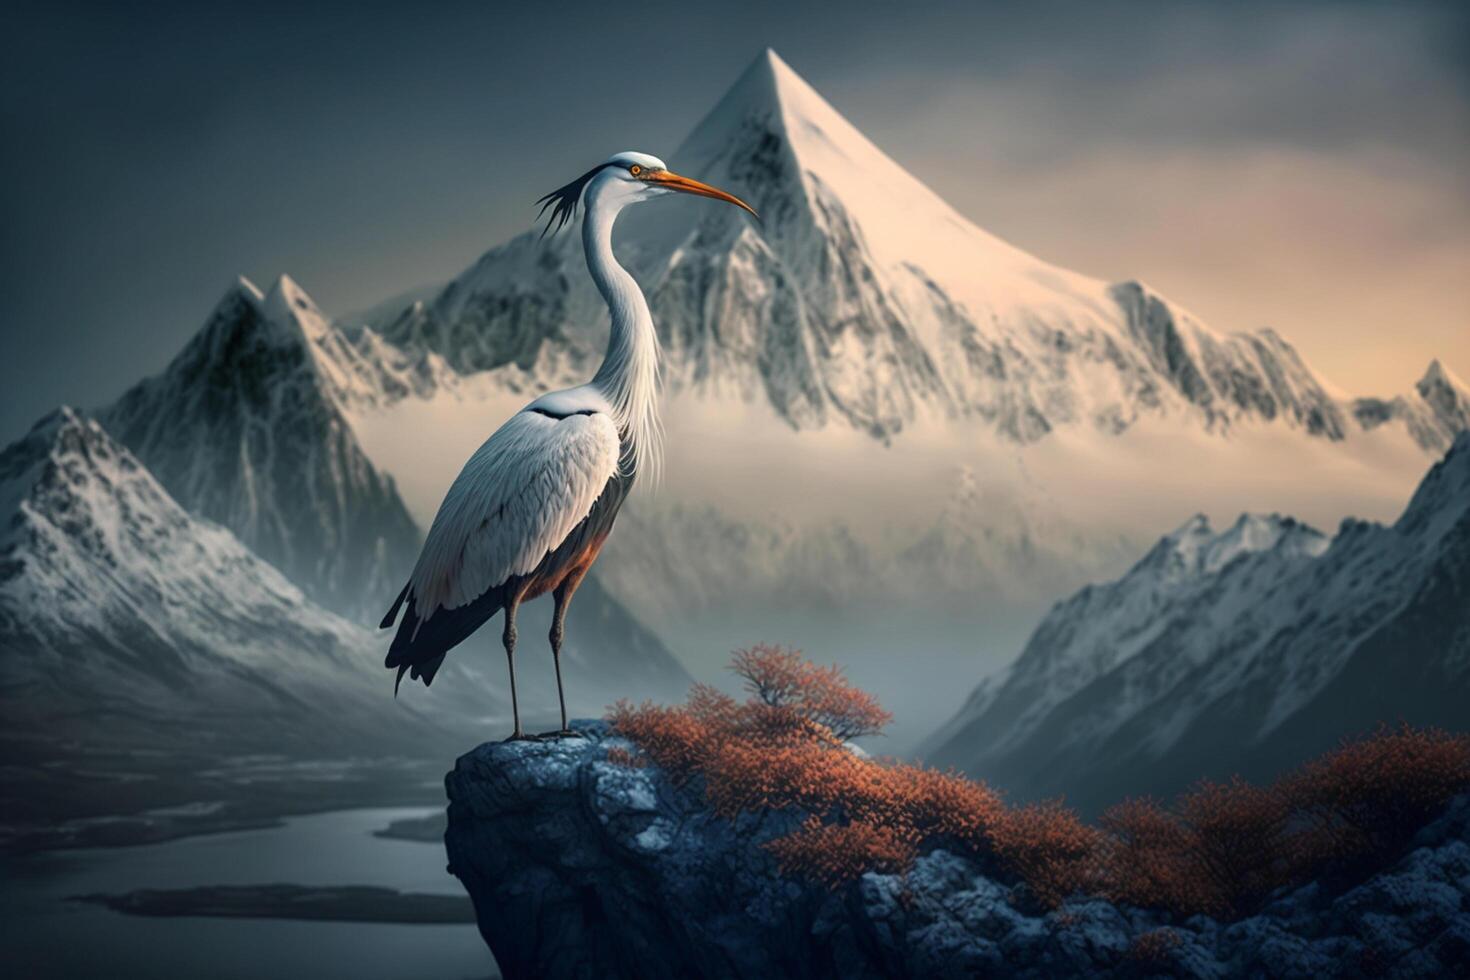 Solitude in the Chinese Landscape A Crane Amidst Snow-Capped Mountains photo